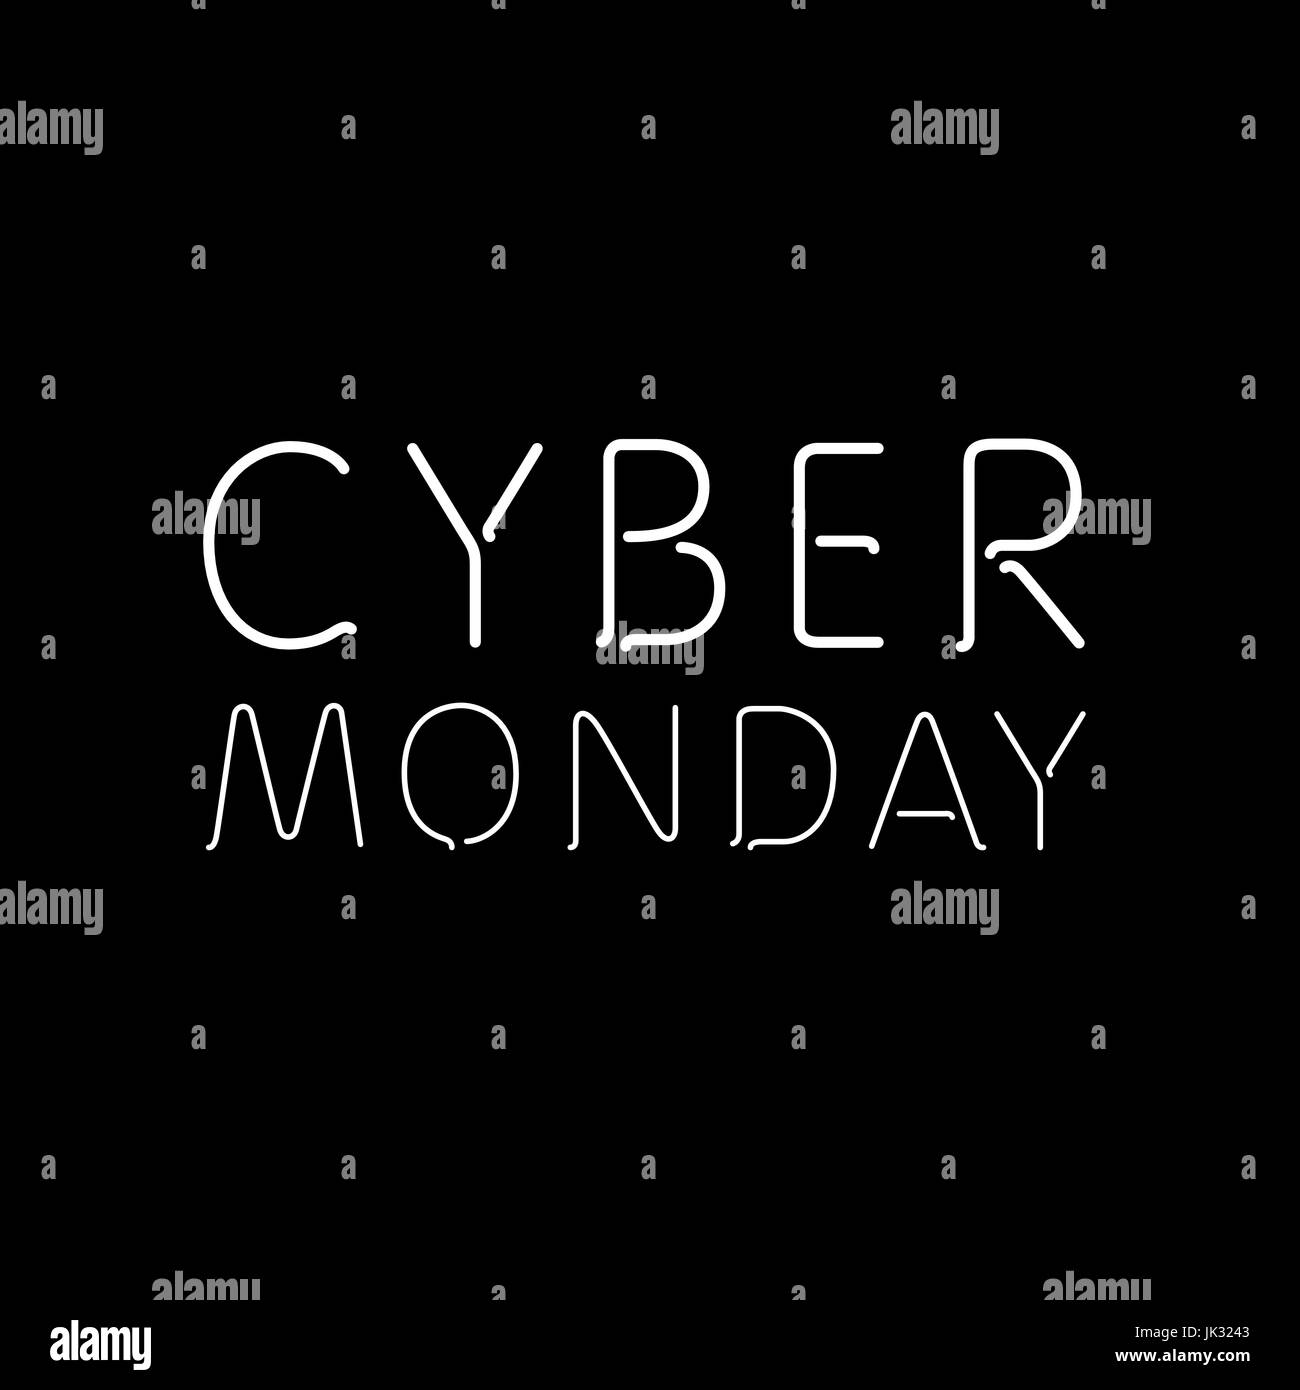 a black background with text for cyber monday art Stock Vector